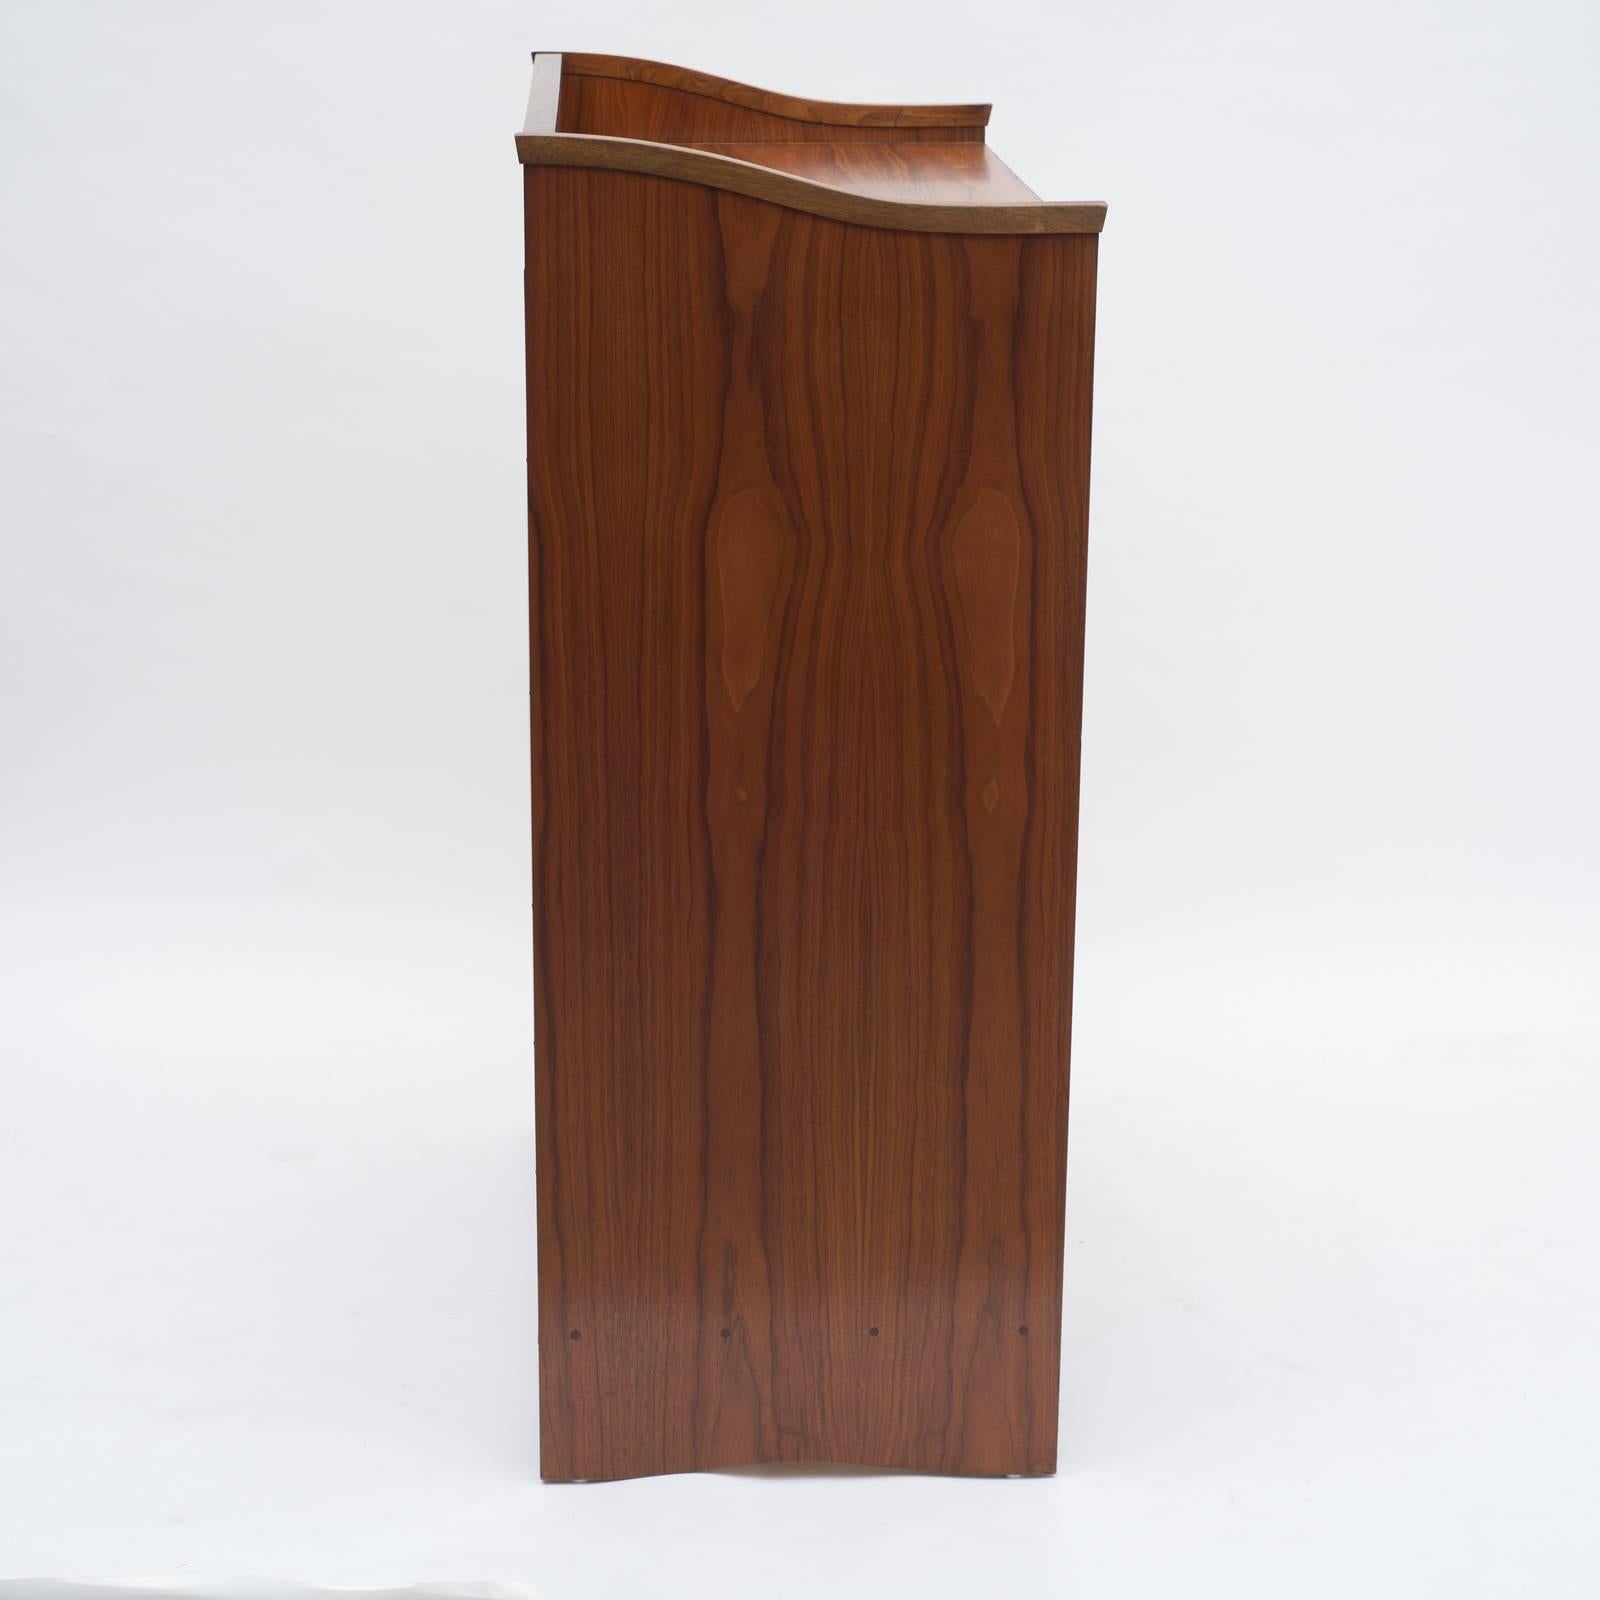 American George Nakashima Walnut Tall Chest of Drawers for Widdicomb, USA, 1960s